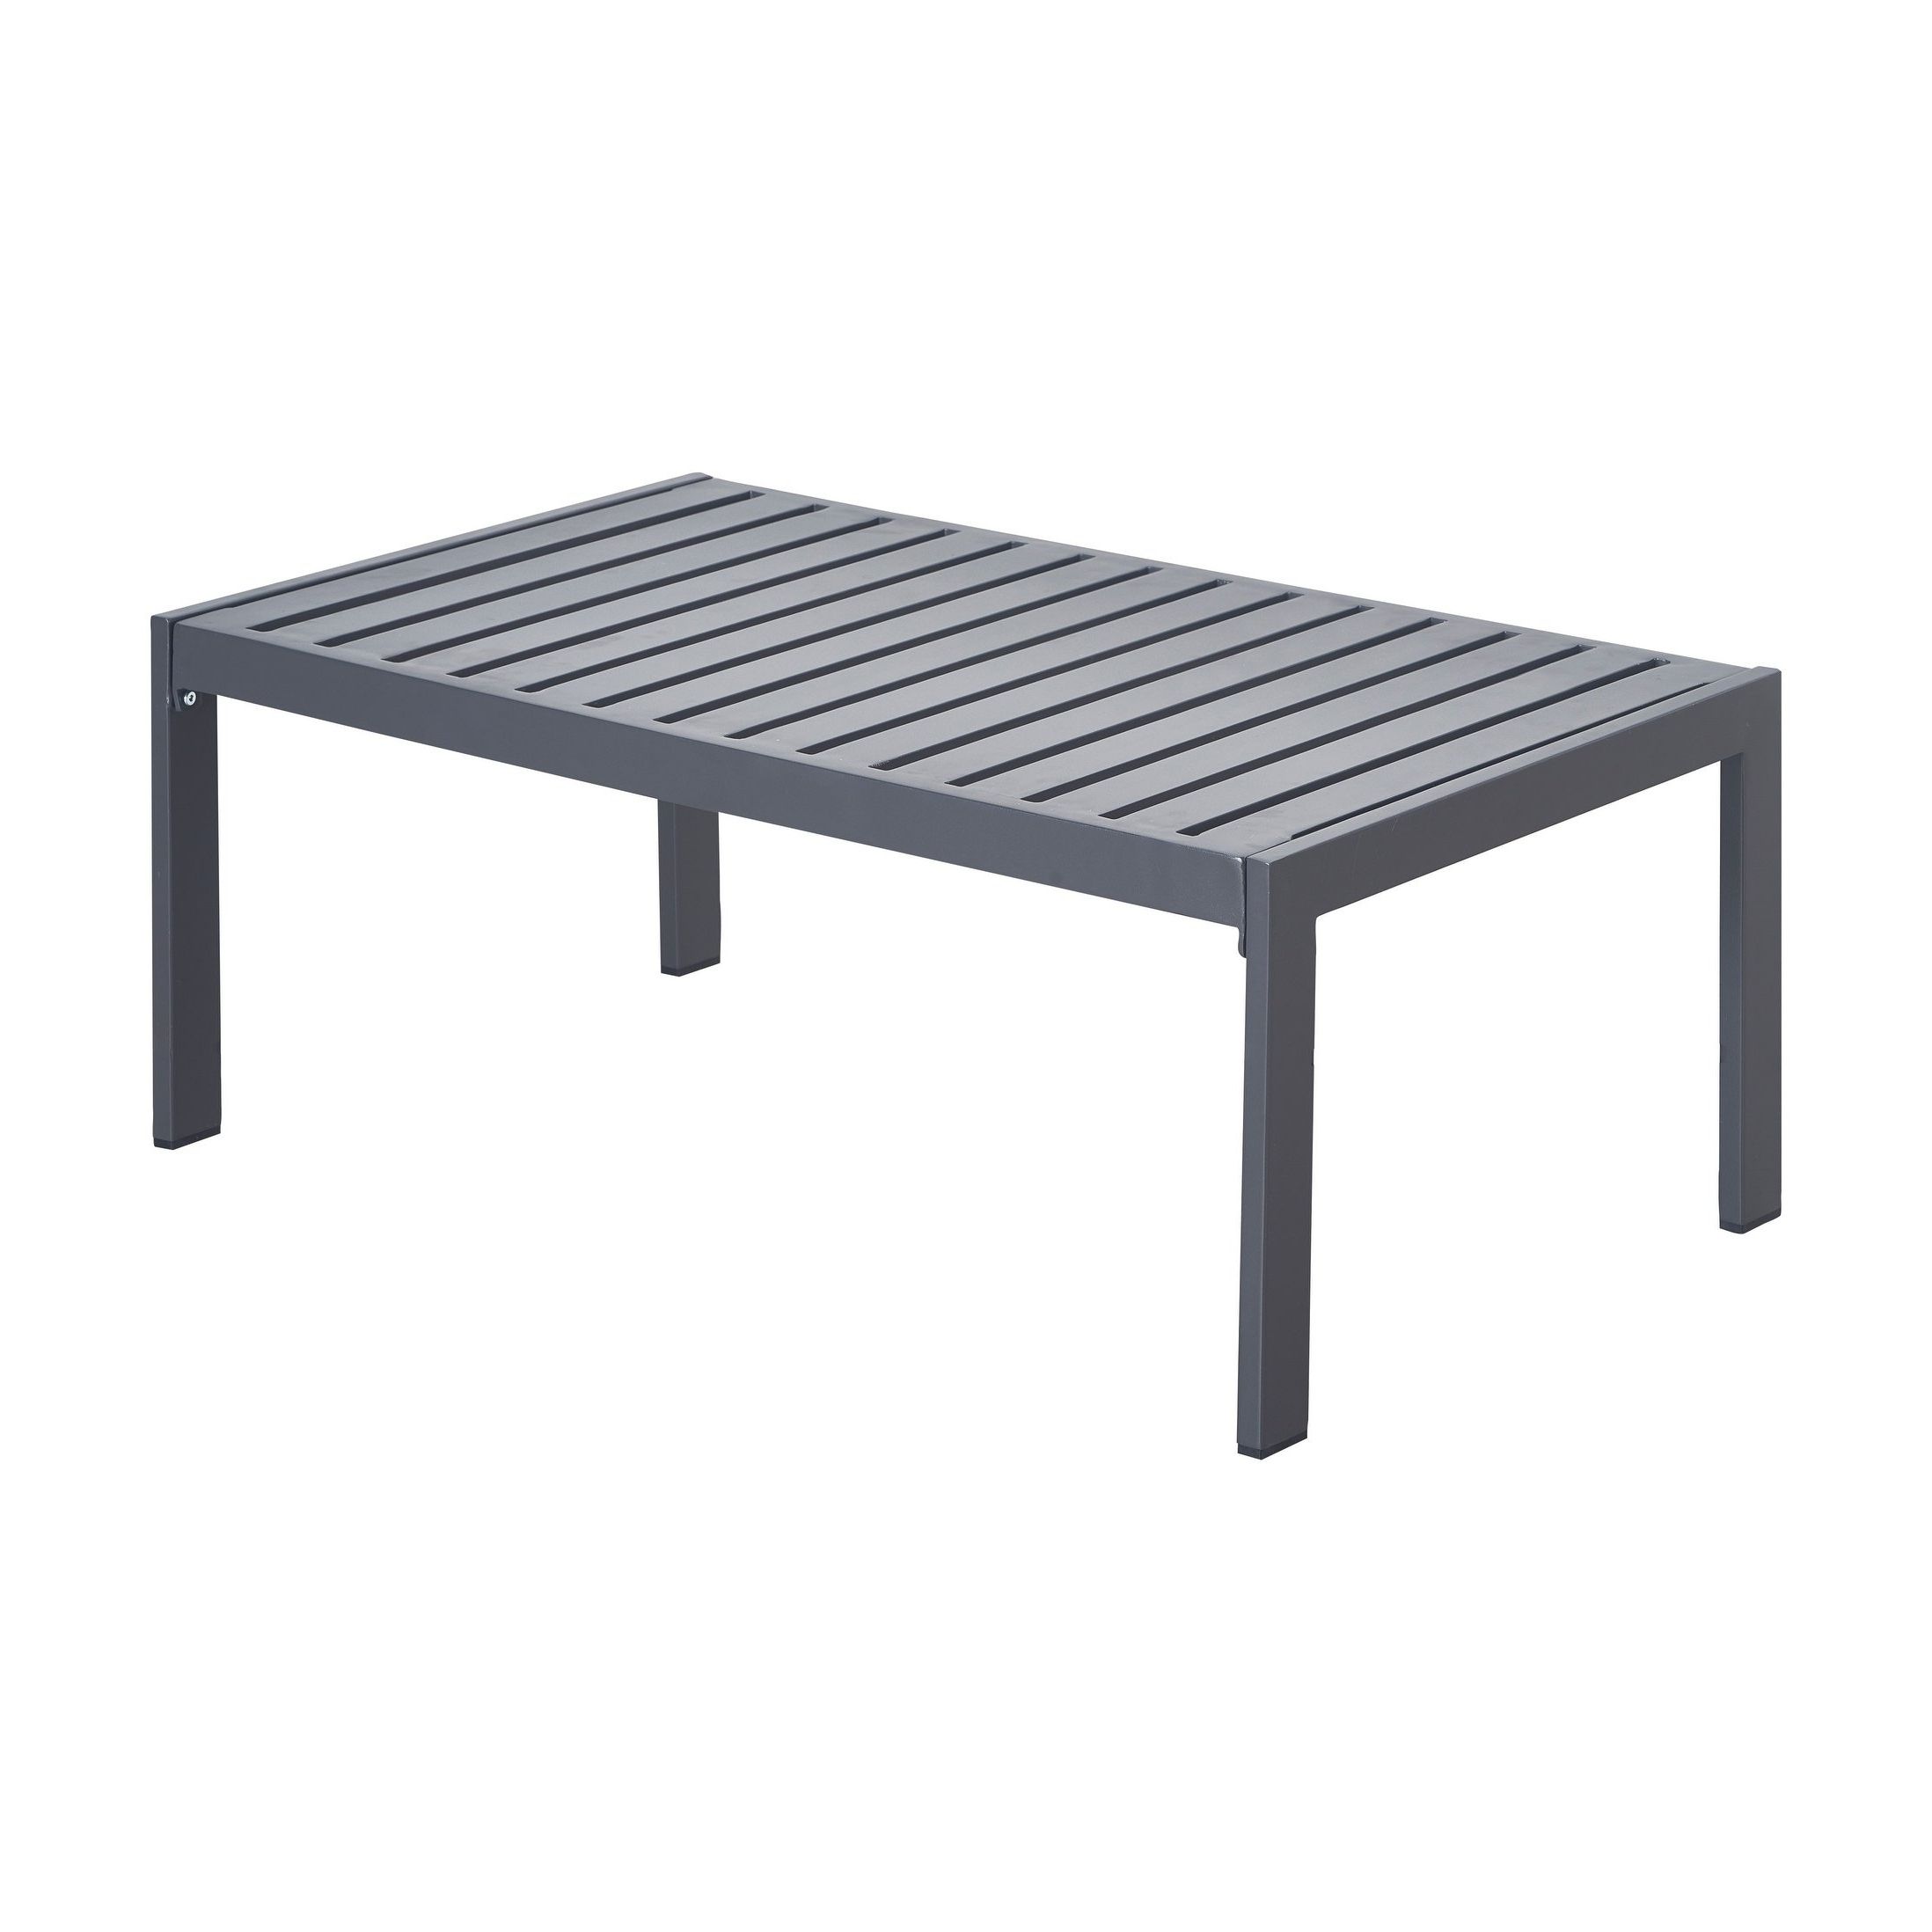 Shop Tommy Hilfiger Monterey Outdoor Coffee Table, Gray Gunmetal Regarding Well Liked Gunmetal Coffee Tables (View 6 of 20)